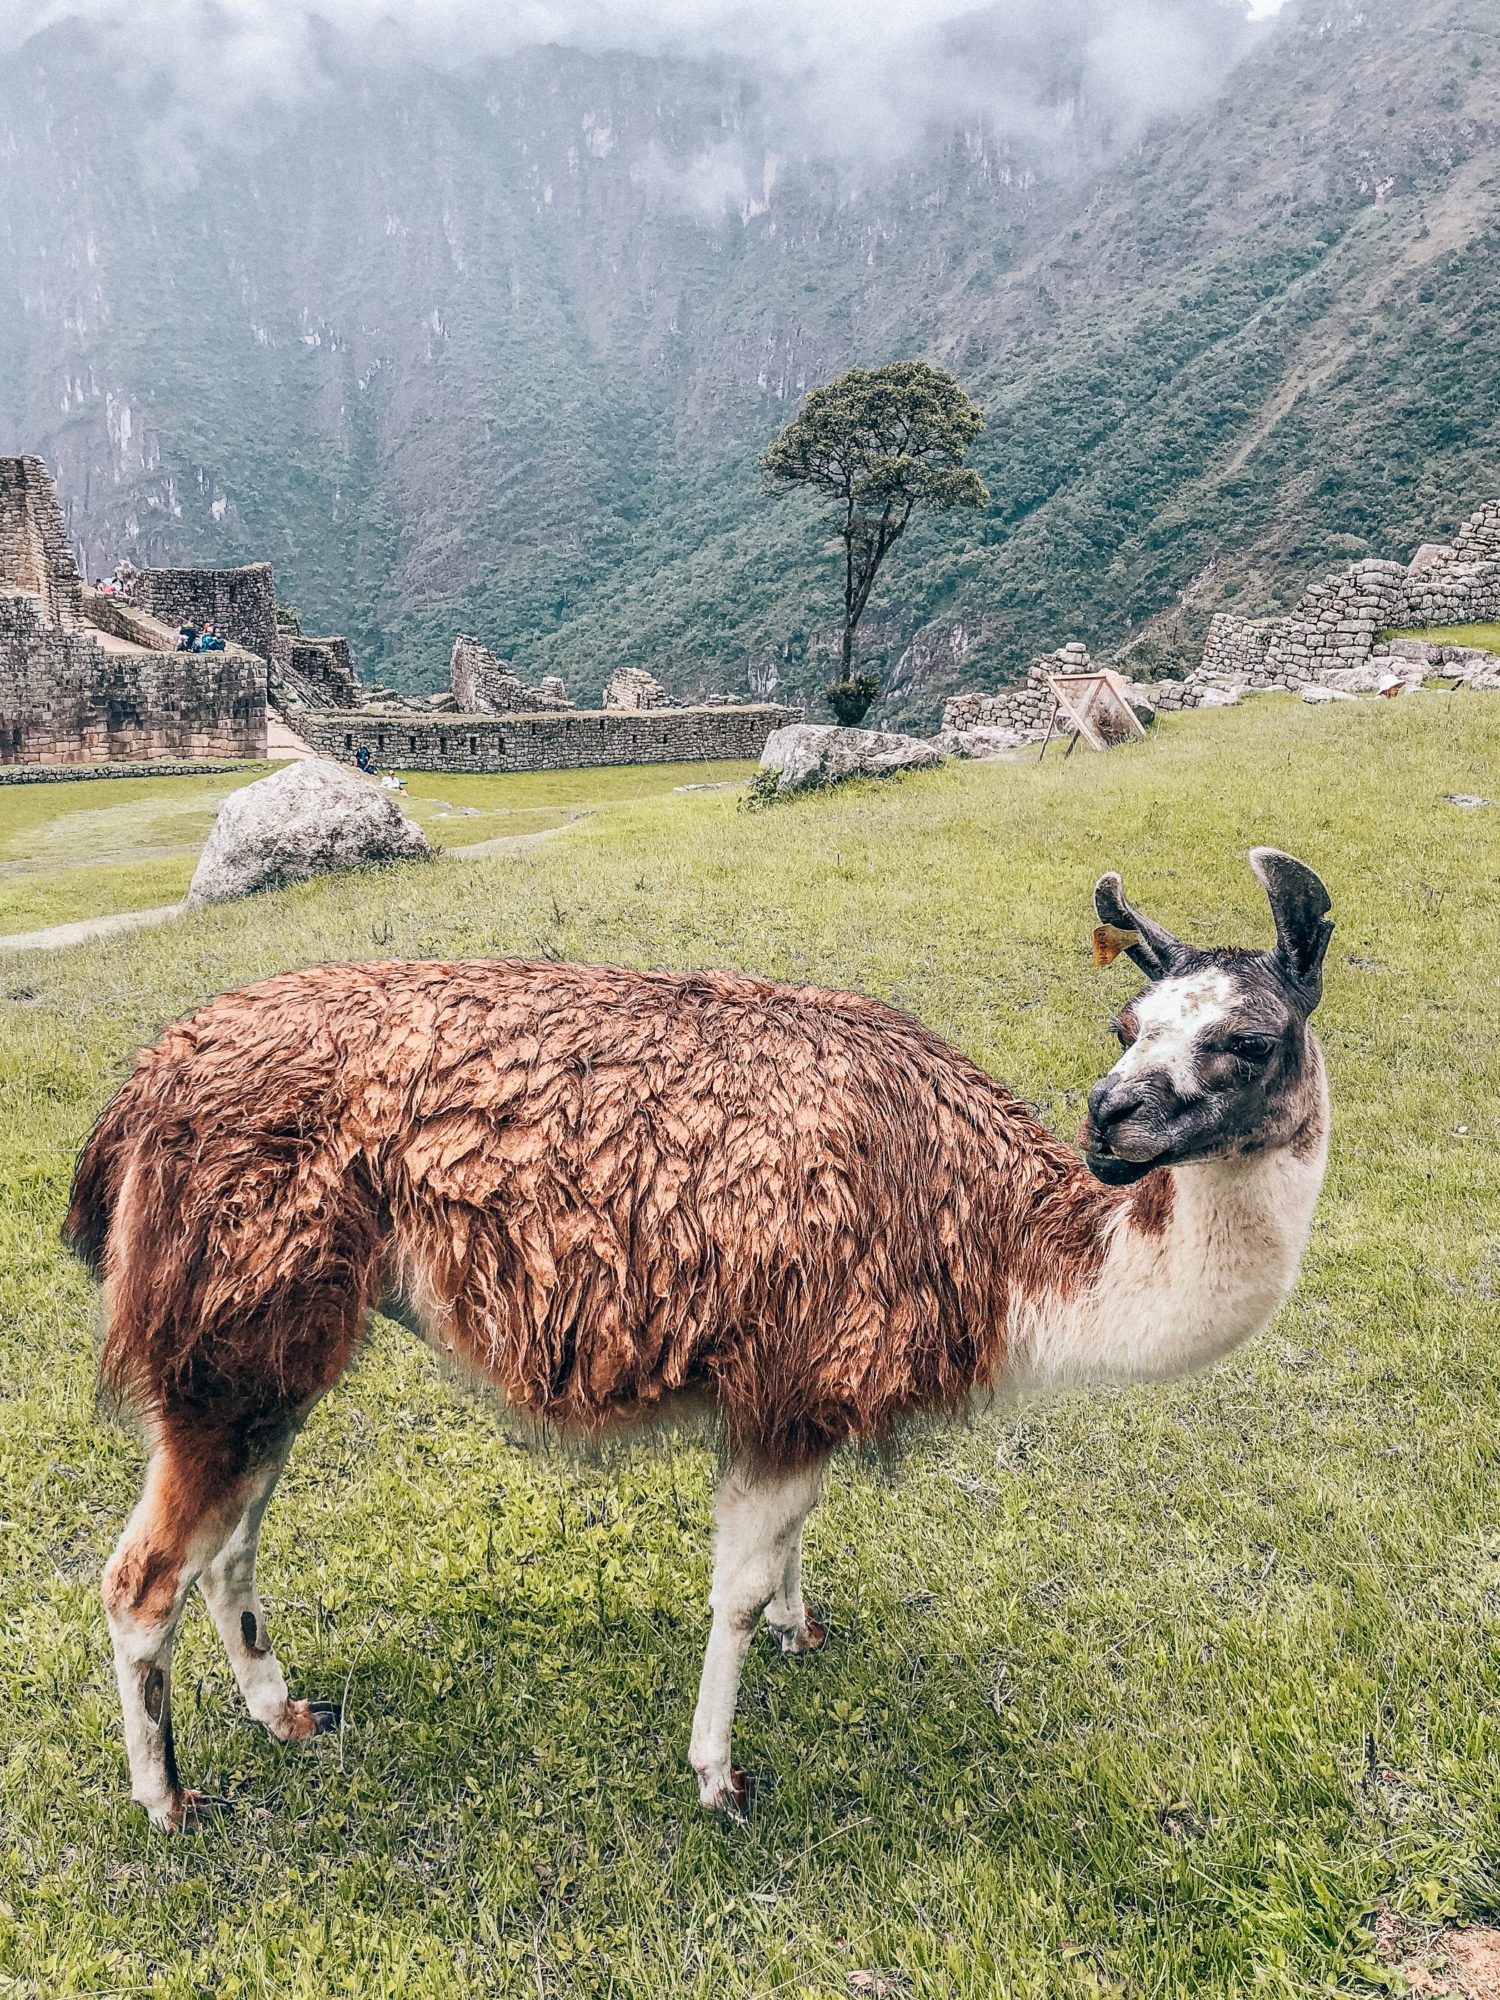 The Ultimate Machu Picchu Travel Guide featured by top San Francisco travel blog, What the Fab